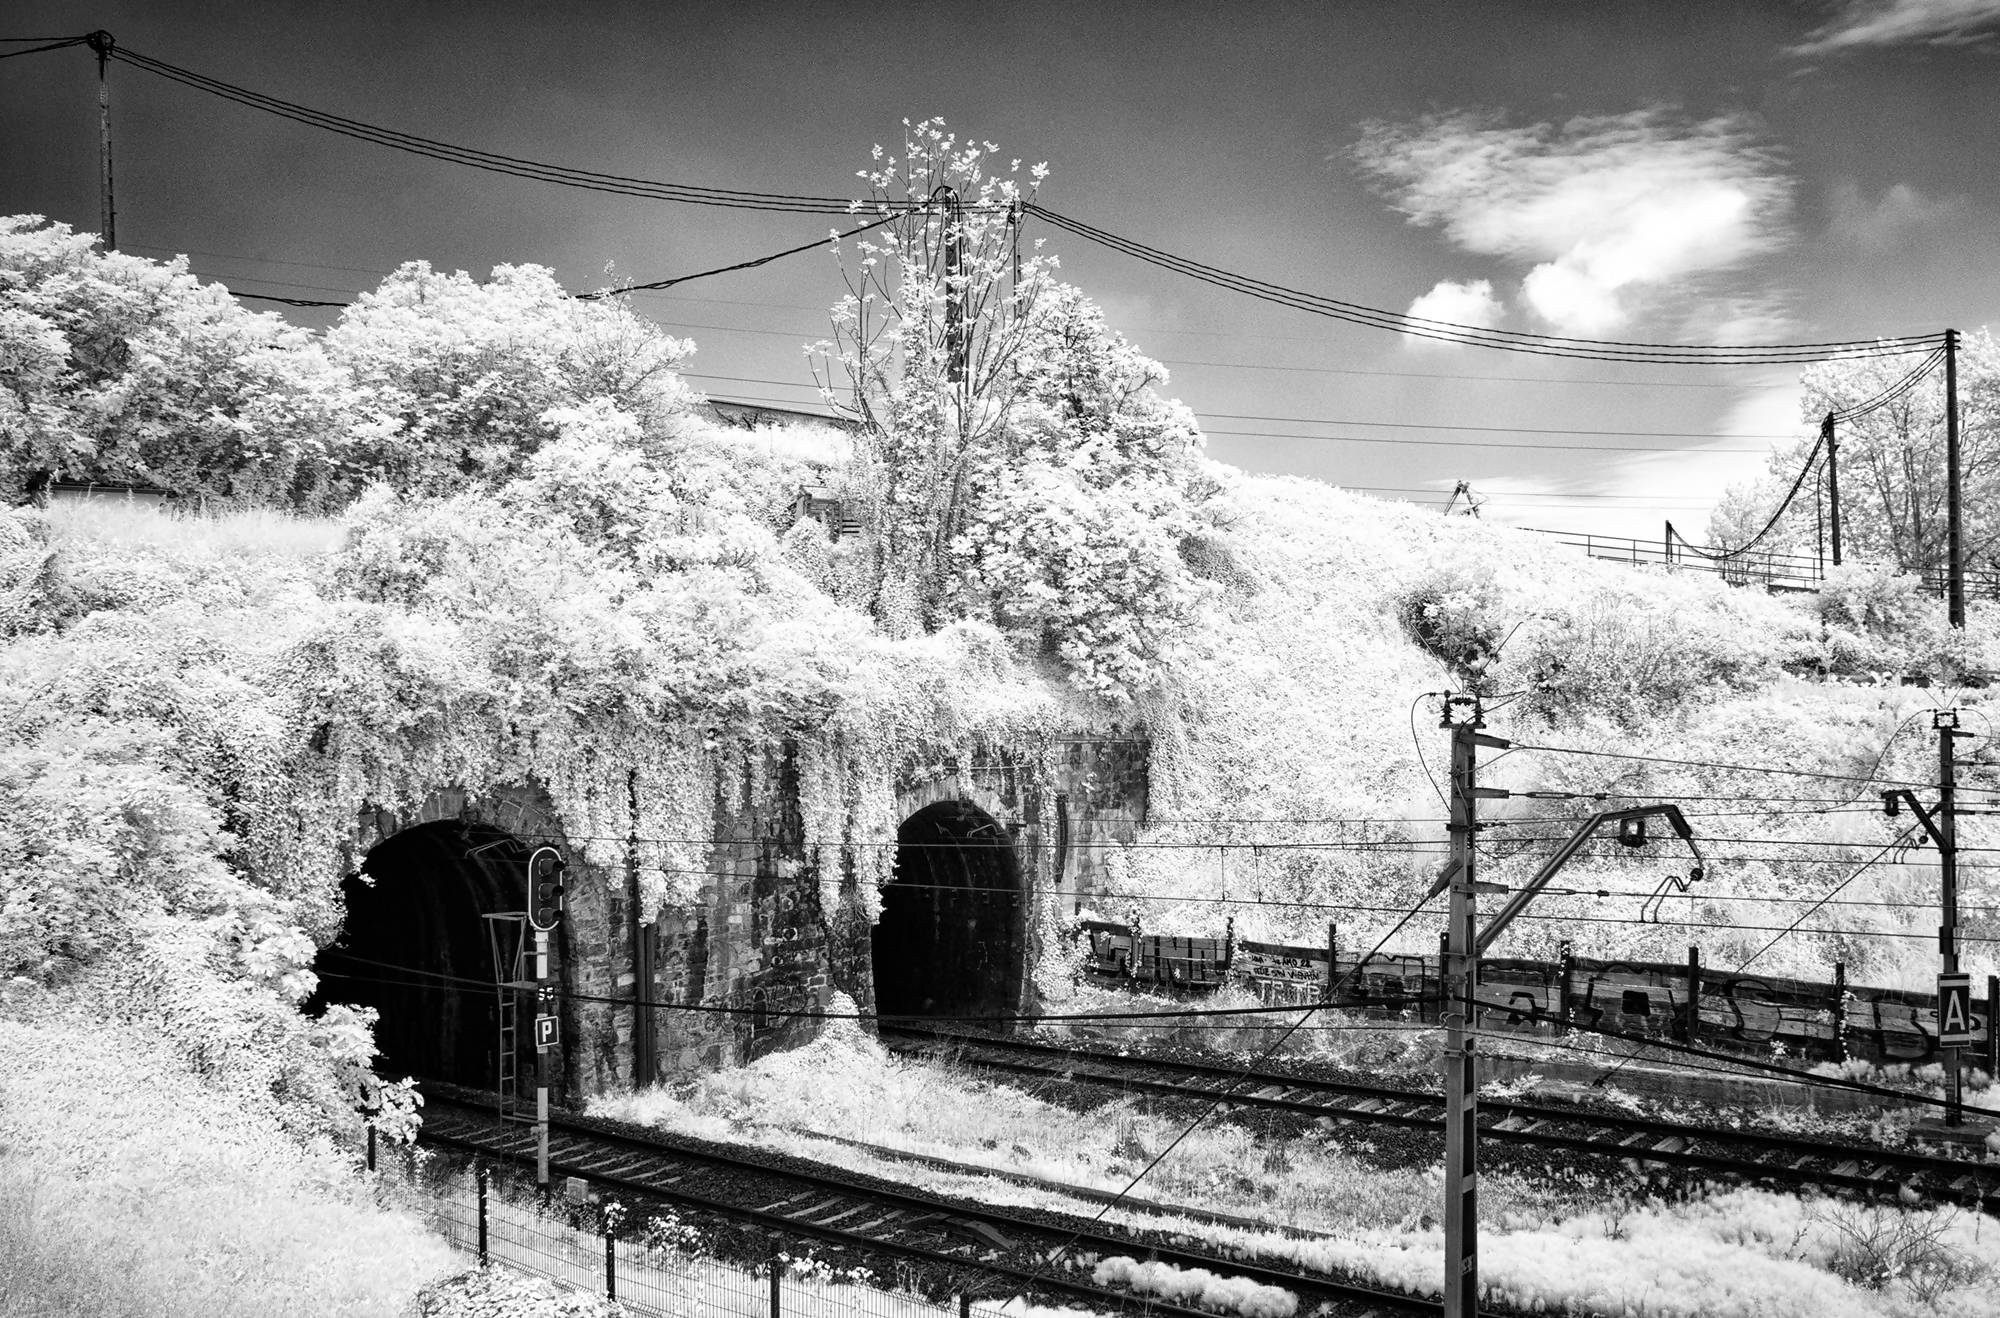 Online Exhibition of Infrared Photography by Marcus Hamilton from 2 July